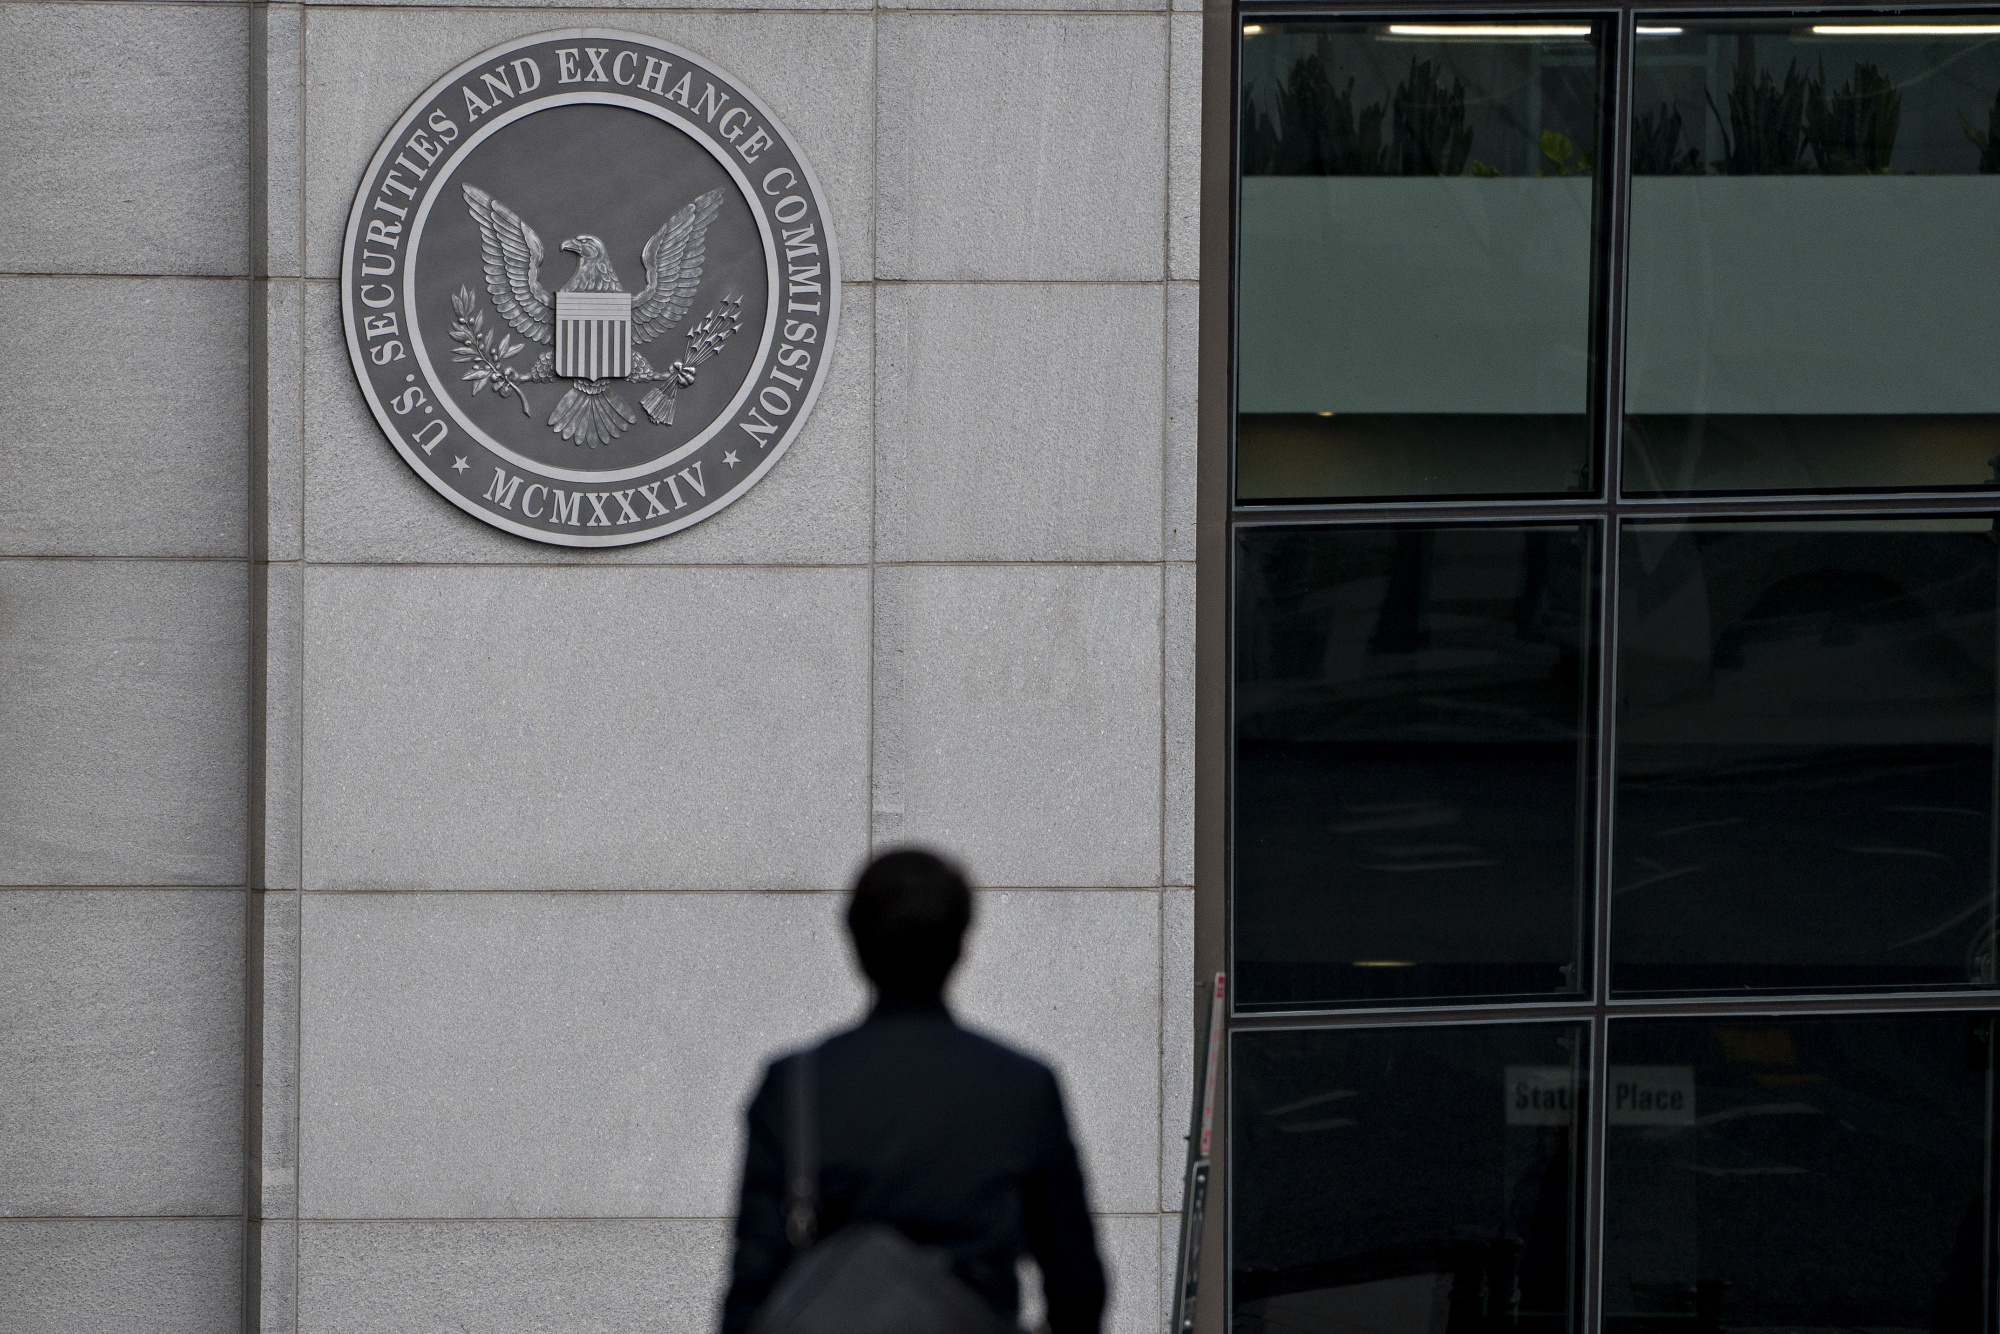 A pedestrian walks near the U.S. Securities and Exchange Commission headquarters in Washington, D.C.